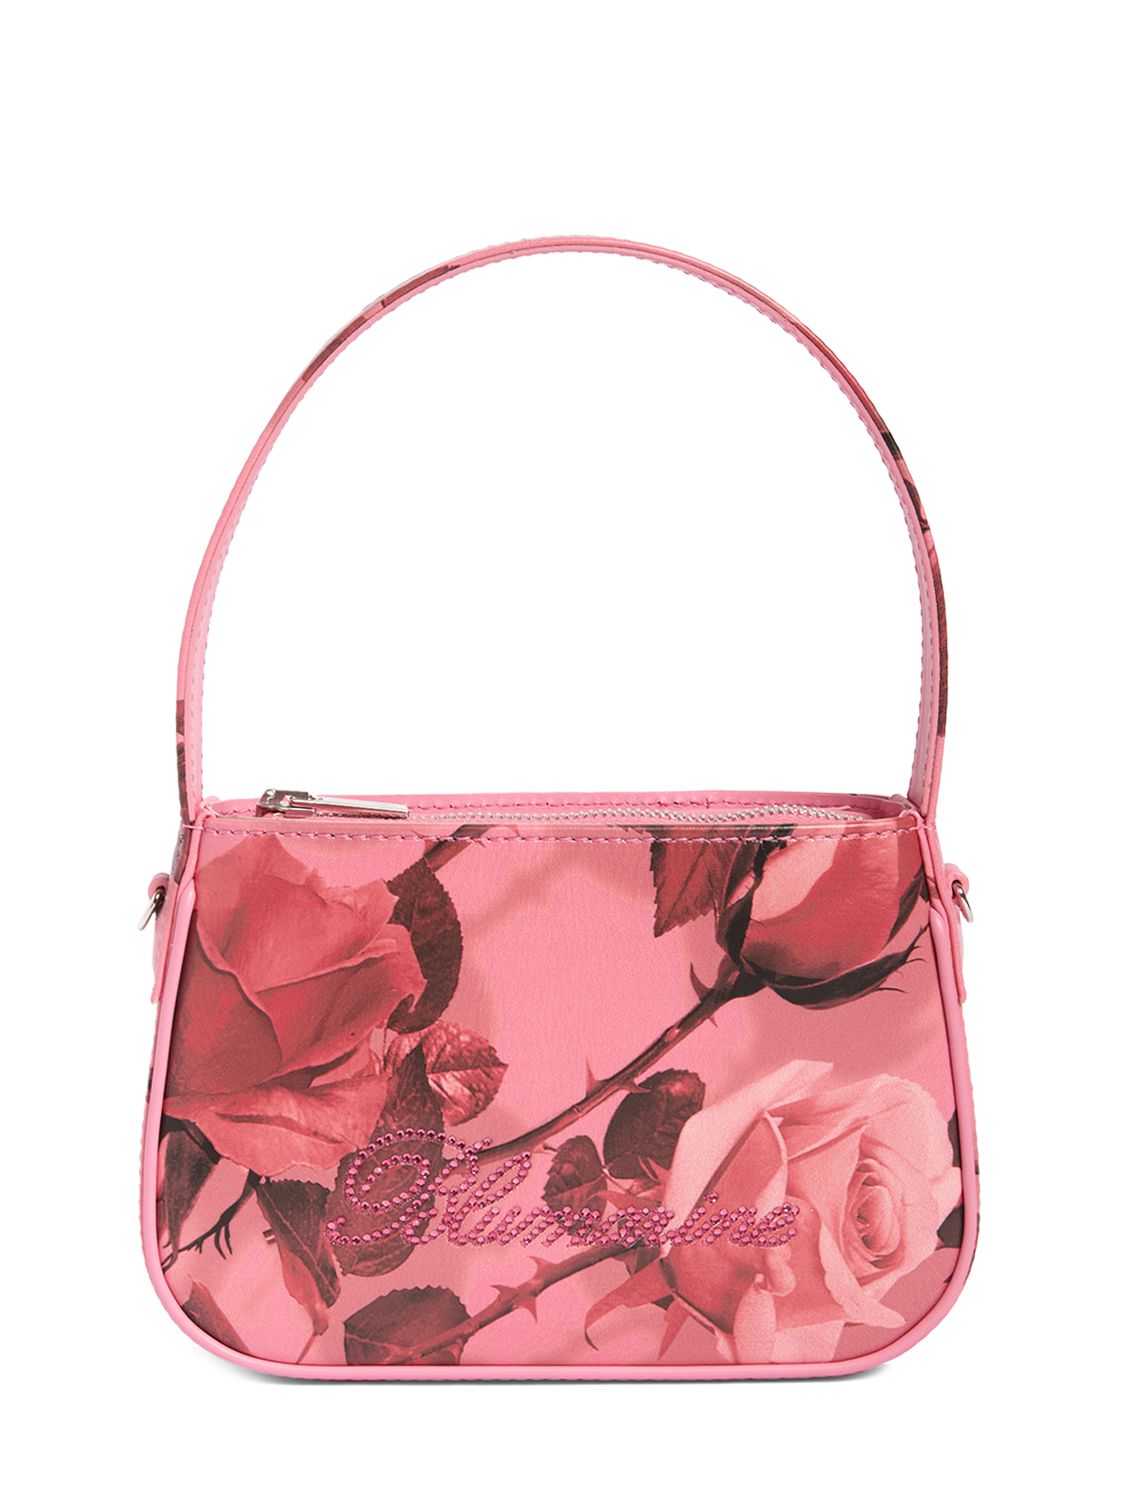 St. Rose Napa Leather Top Handle Bag